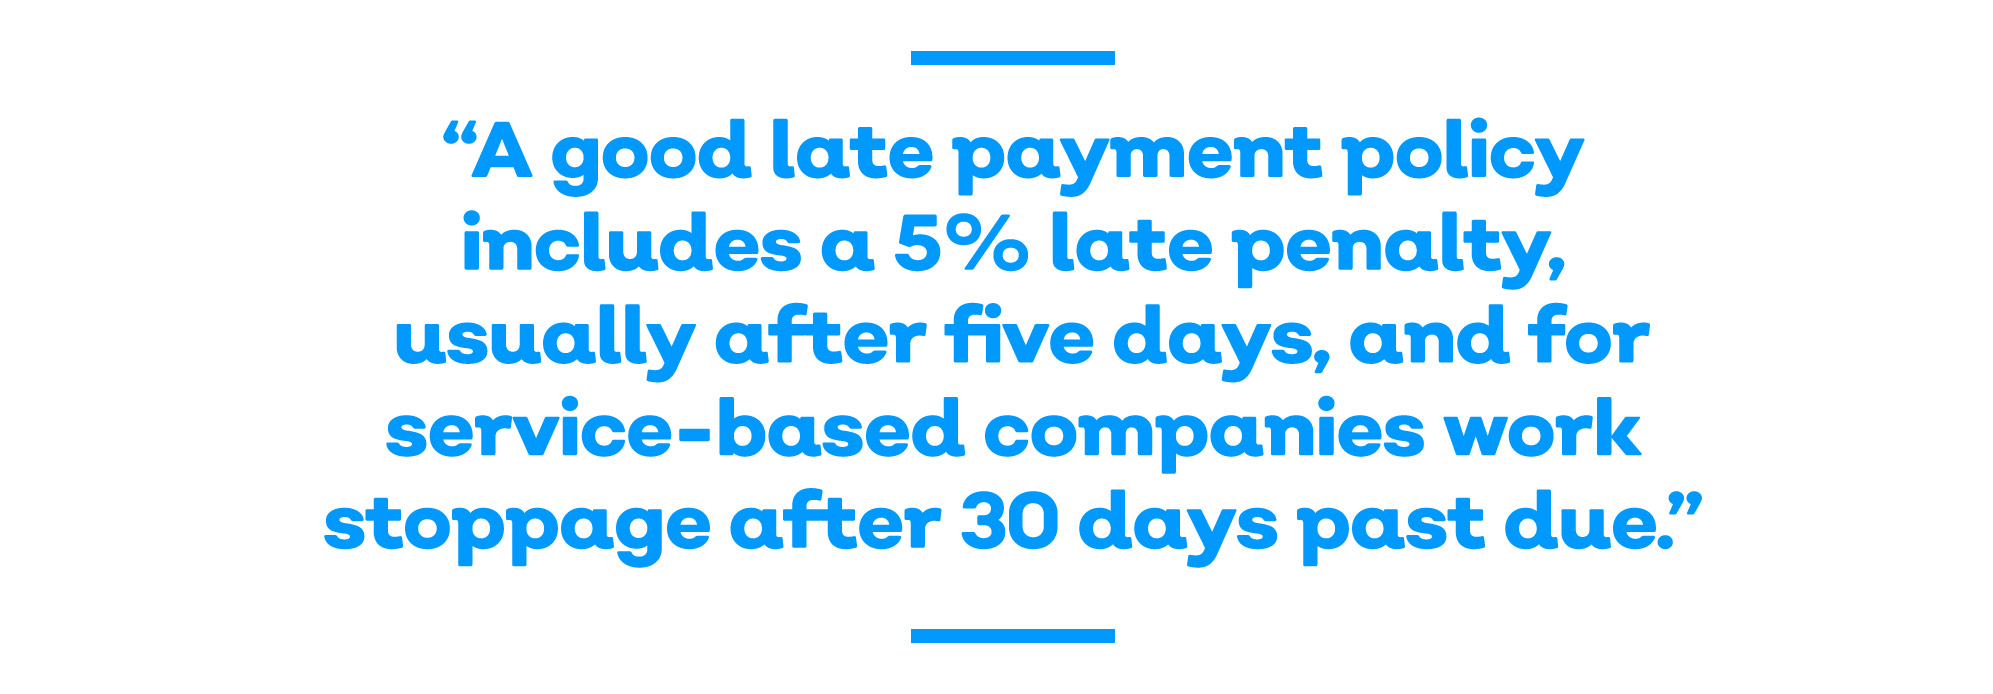 A good late payment policy includes a 5% late penalty, usually after five days, and - for service-based companies - work stoppage after 30 days past due.